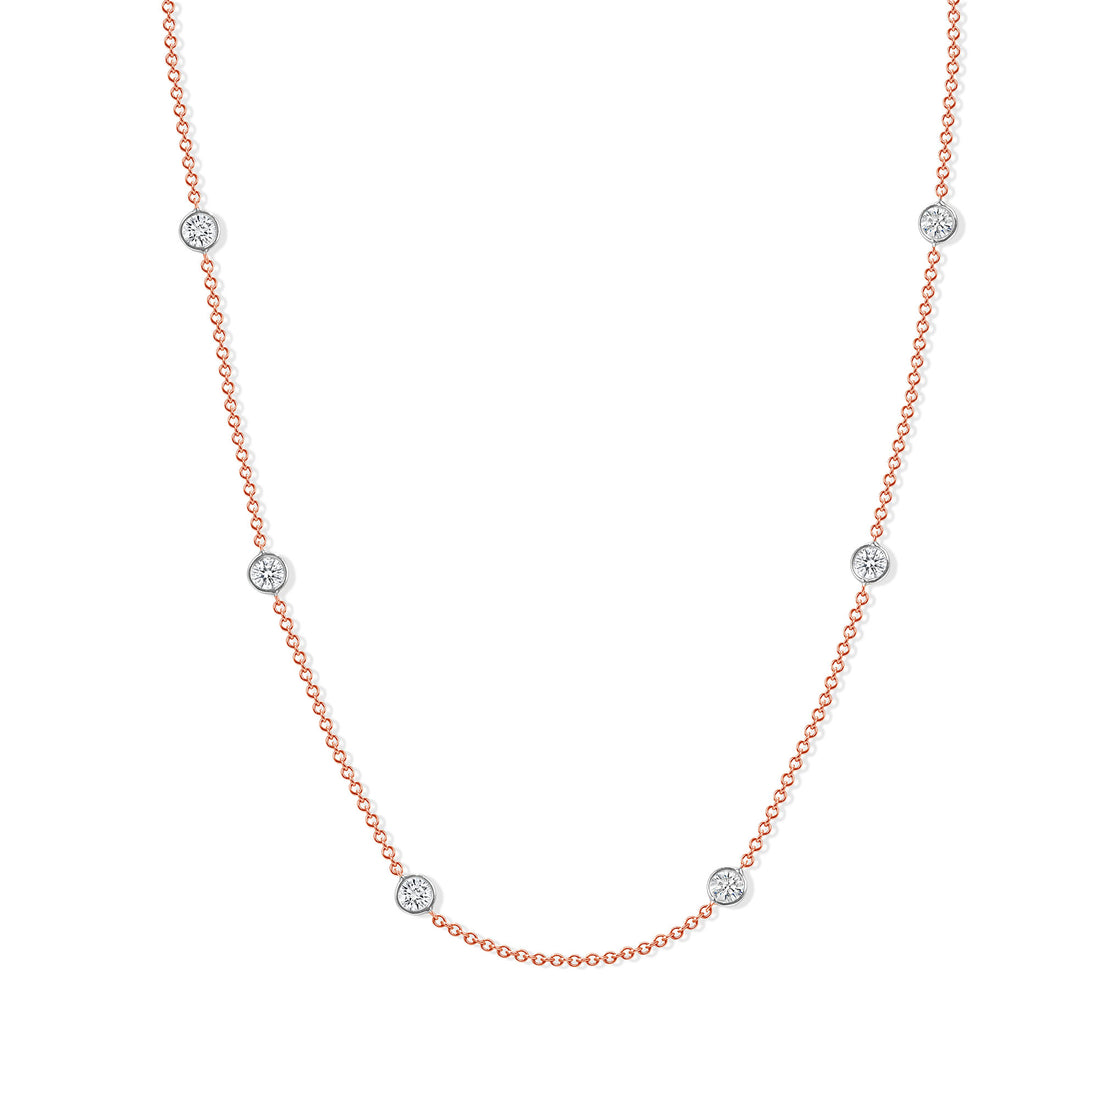 2.43 CT Round Brilliant Diamond Bezel Set Necklace in 14K White Gold and Rose Gold